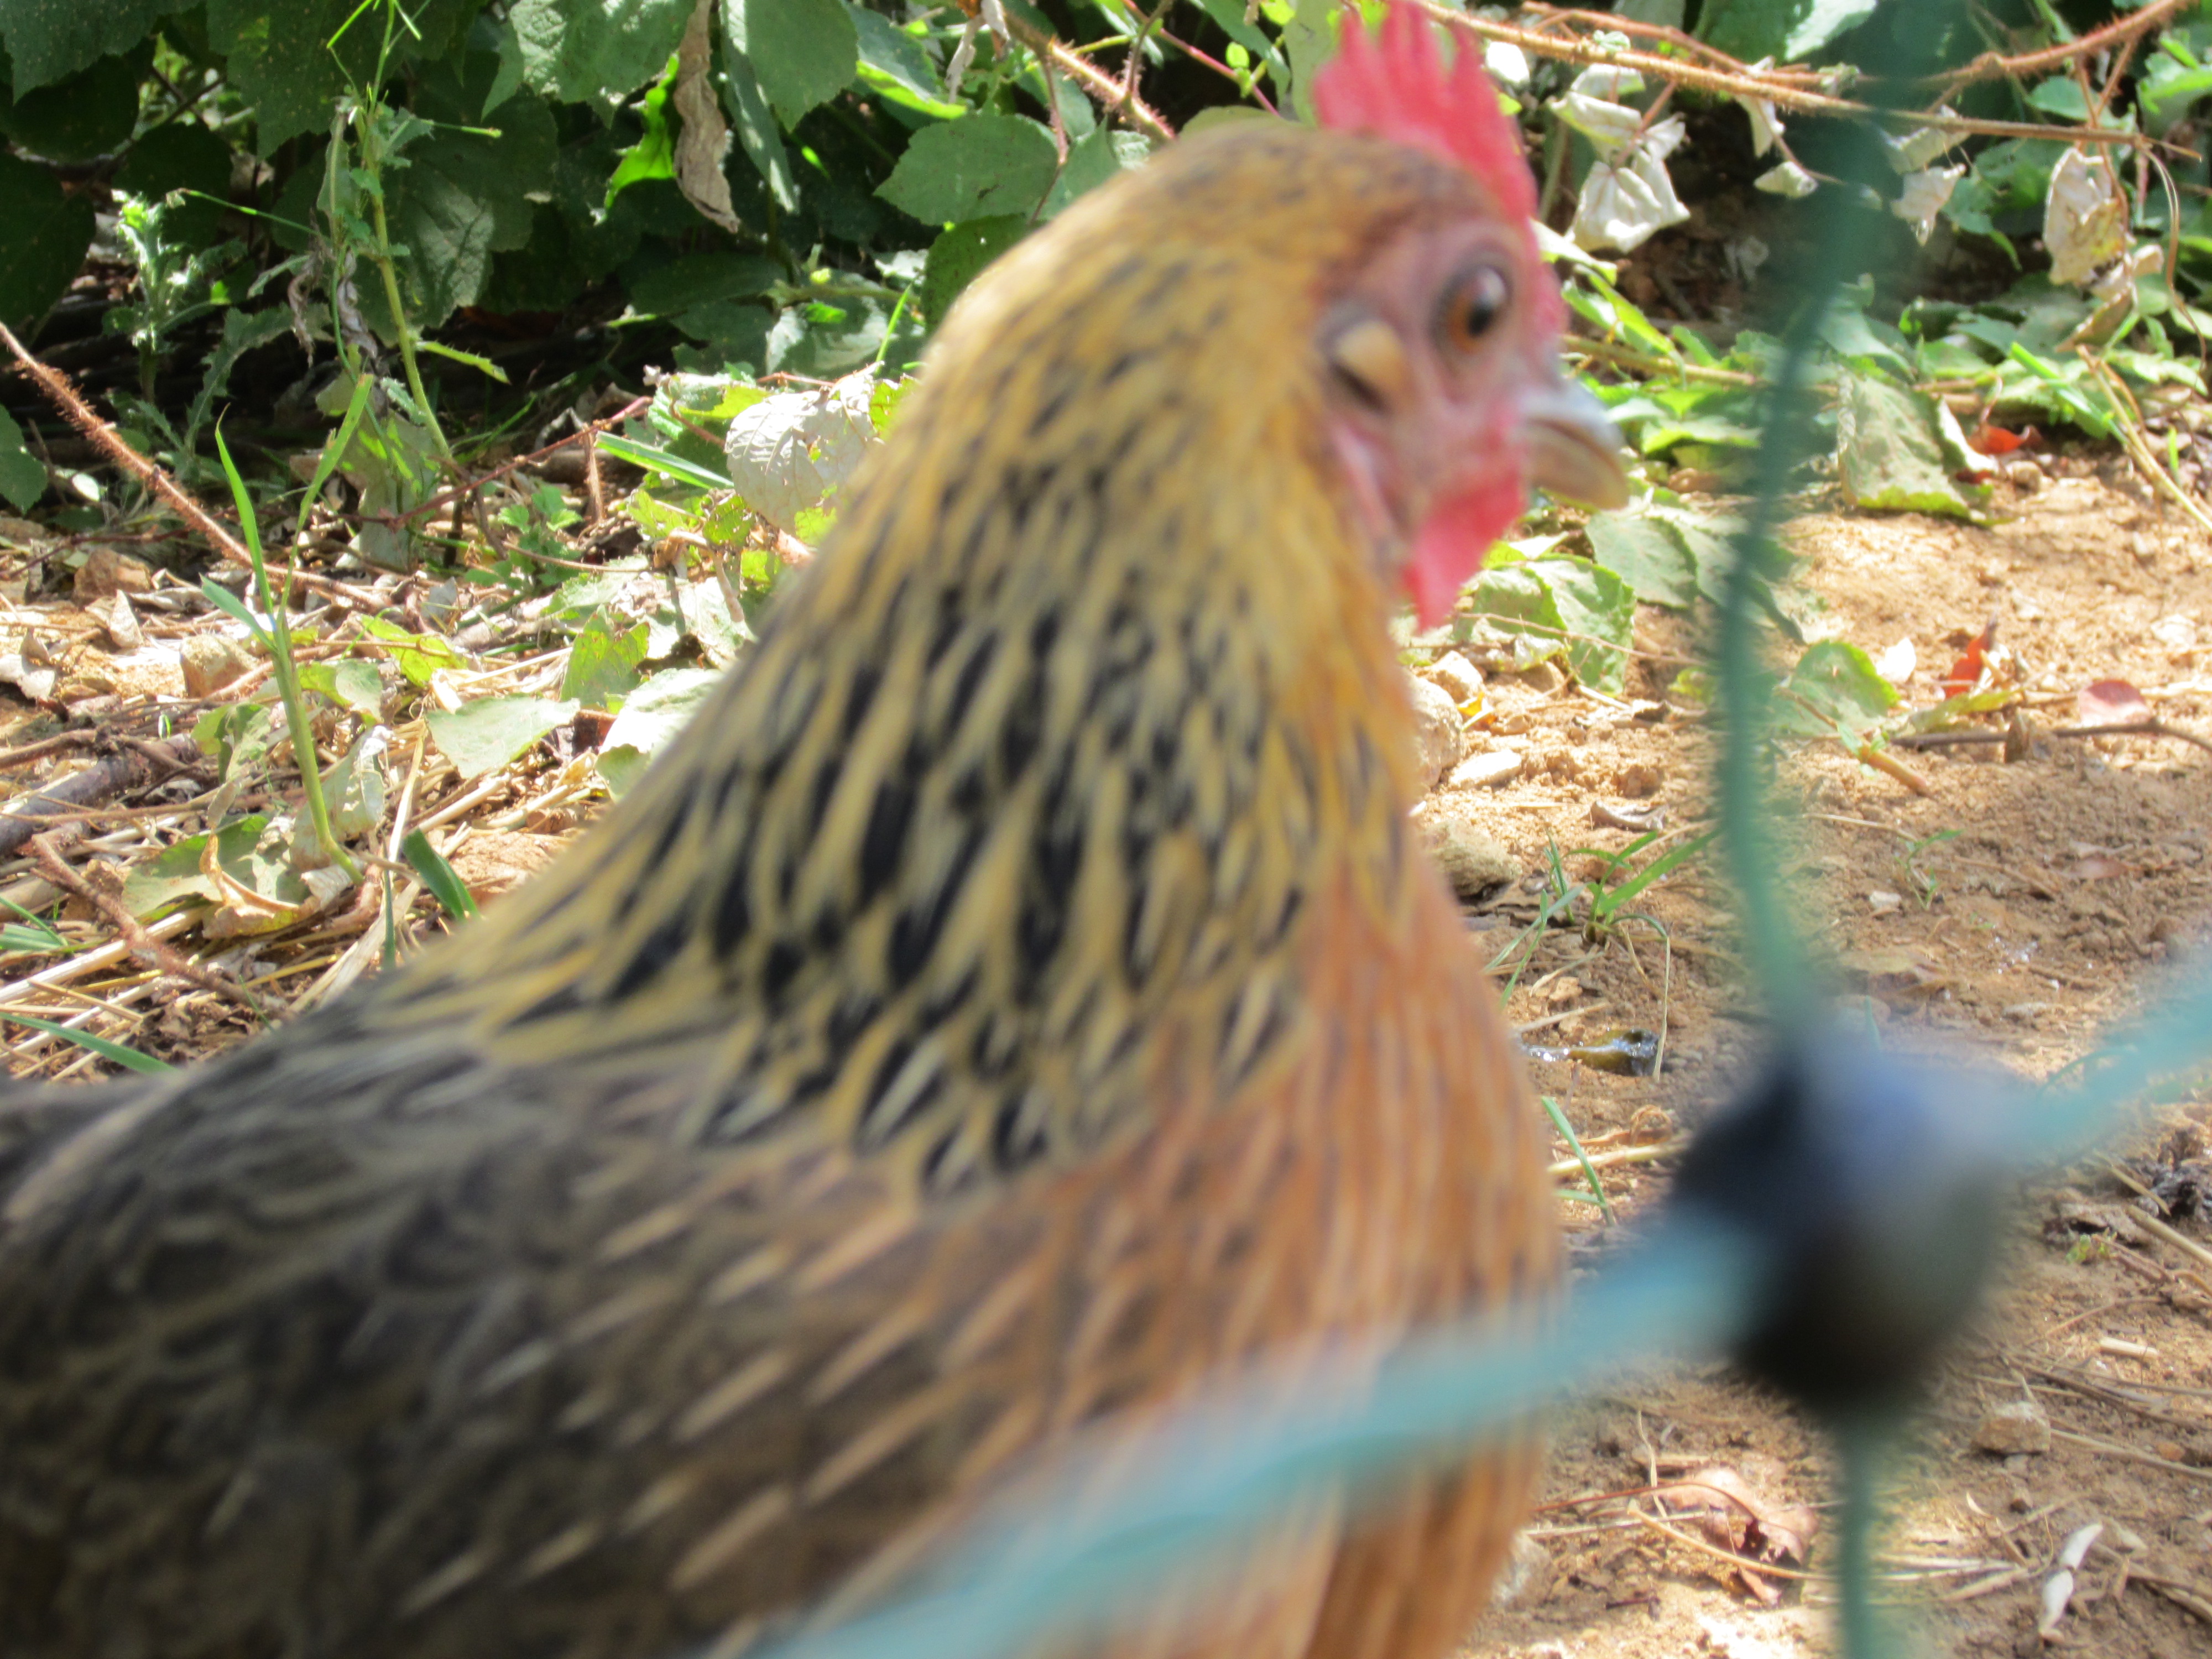 Our Dutch Bantam, we just call her Bantam. She is feisty and will fly up on your shoulder if and when she wants to. She is very broody, and has hatched out two batches of chicks. She turned one year old in March.